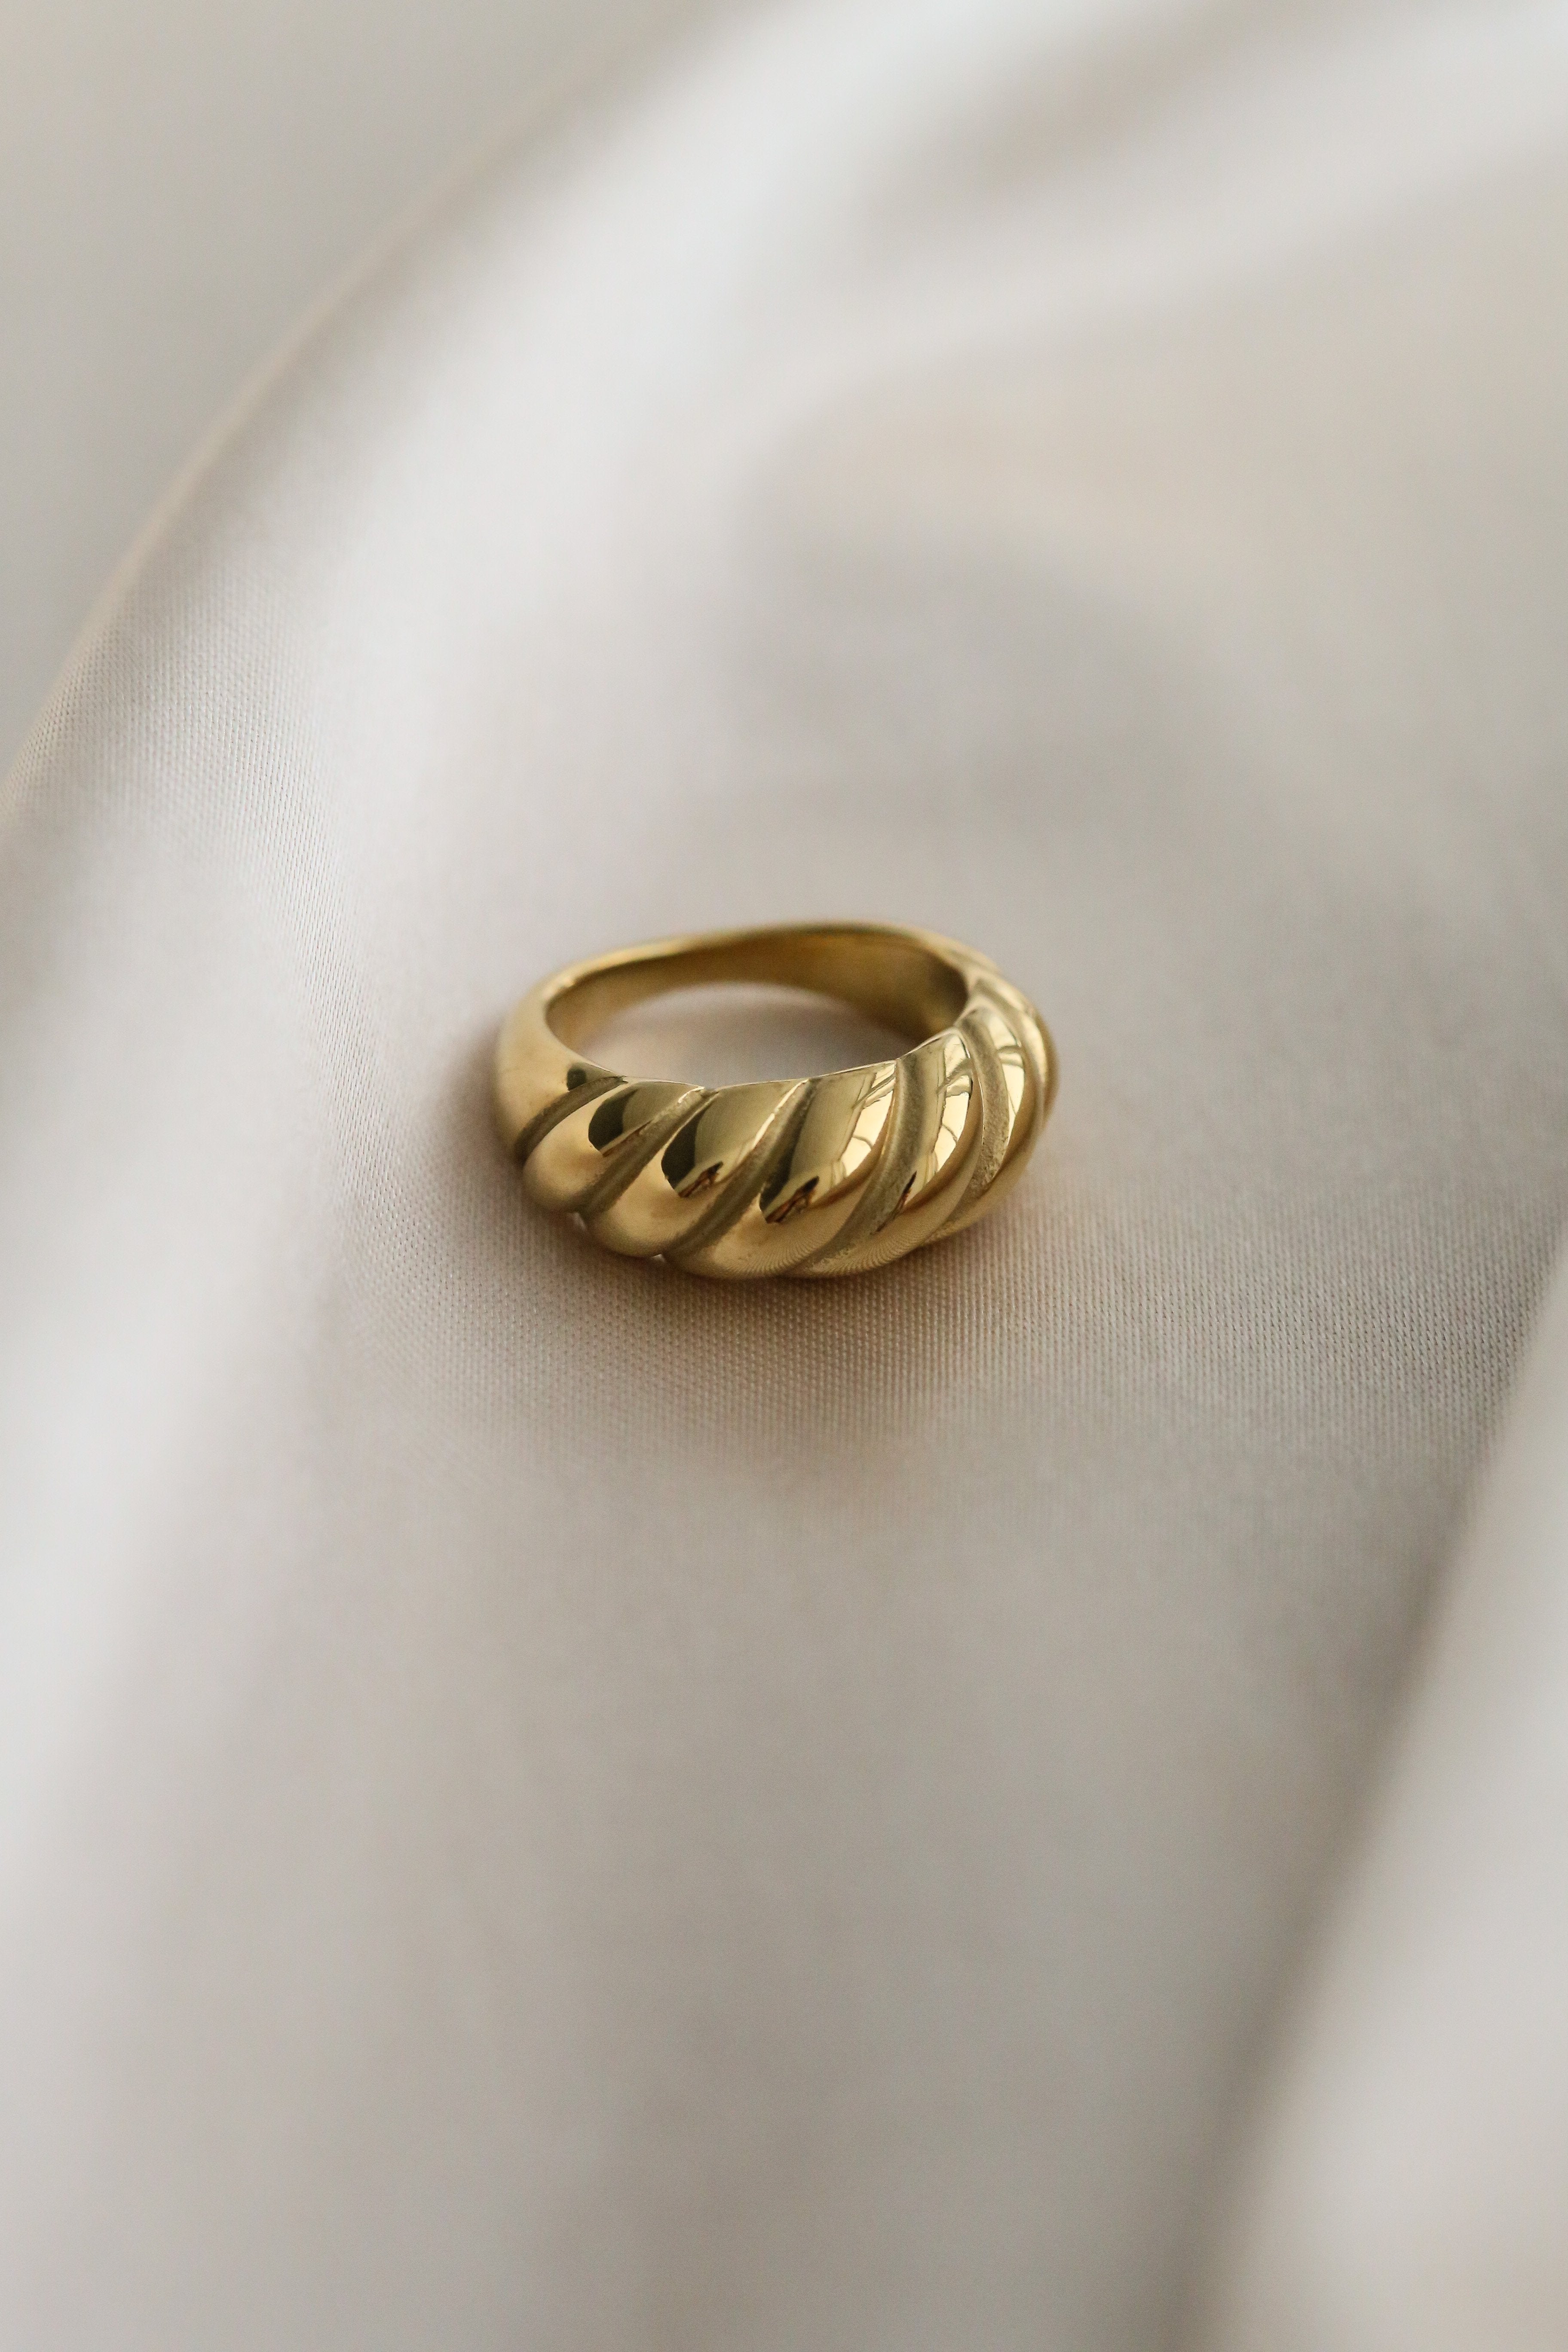 Angelica Ring - Boutique Minimaliste has waterproof, durable, elegant and vintage inspired jewelry